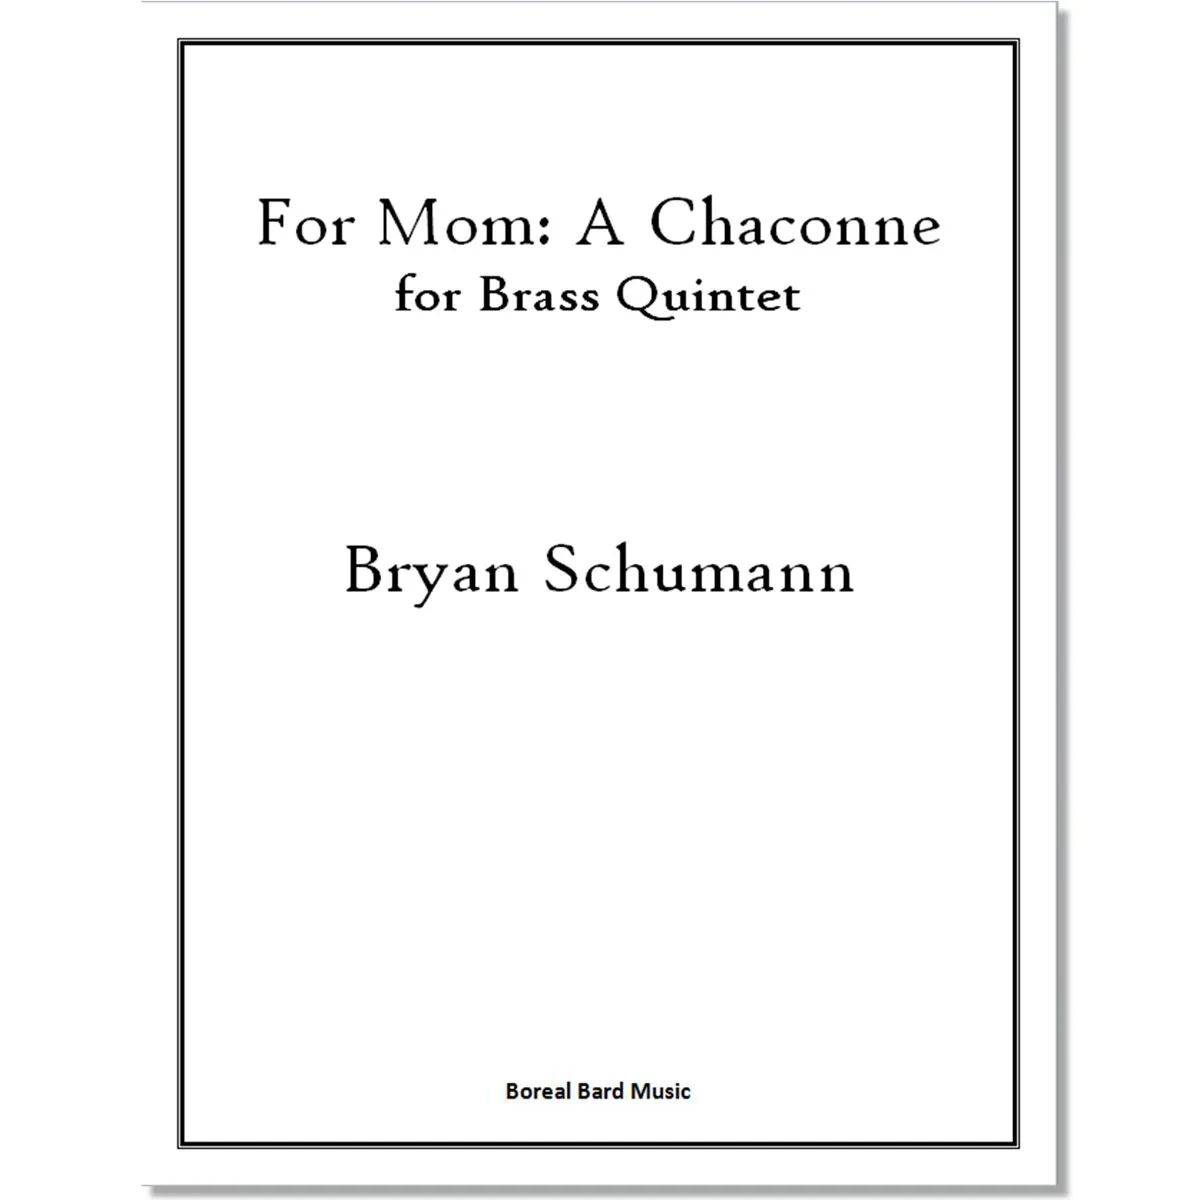 For Mom: A Chaconne for Brass Quintet (sheet music)